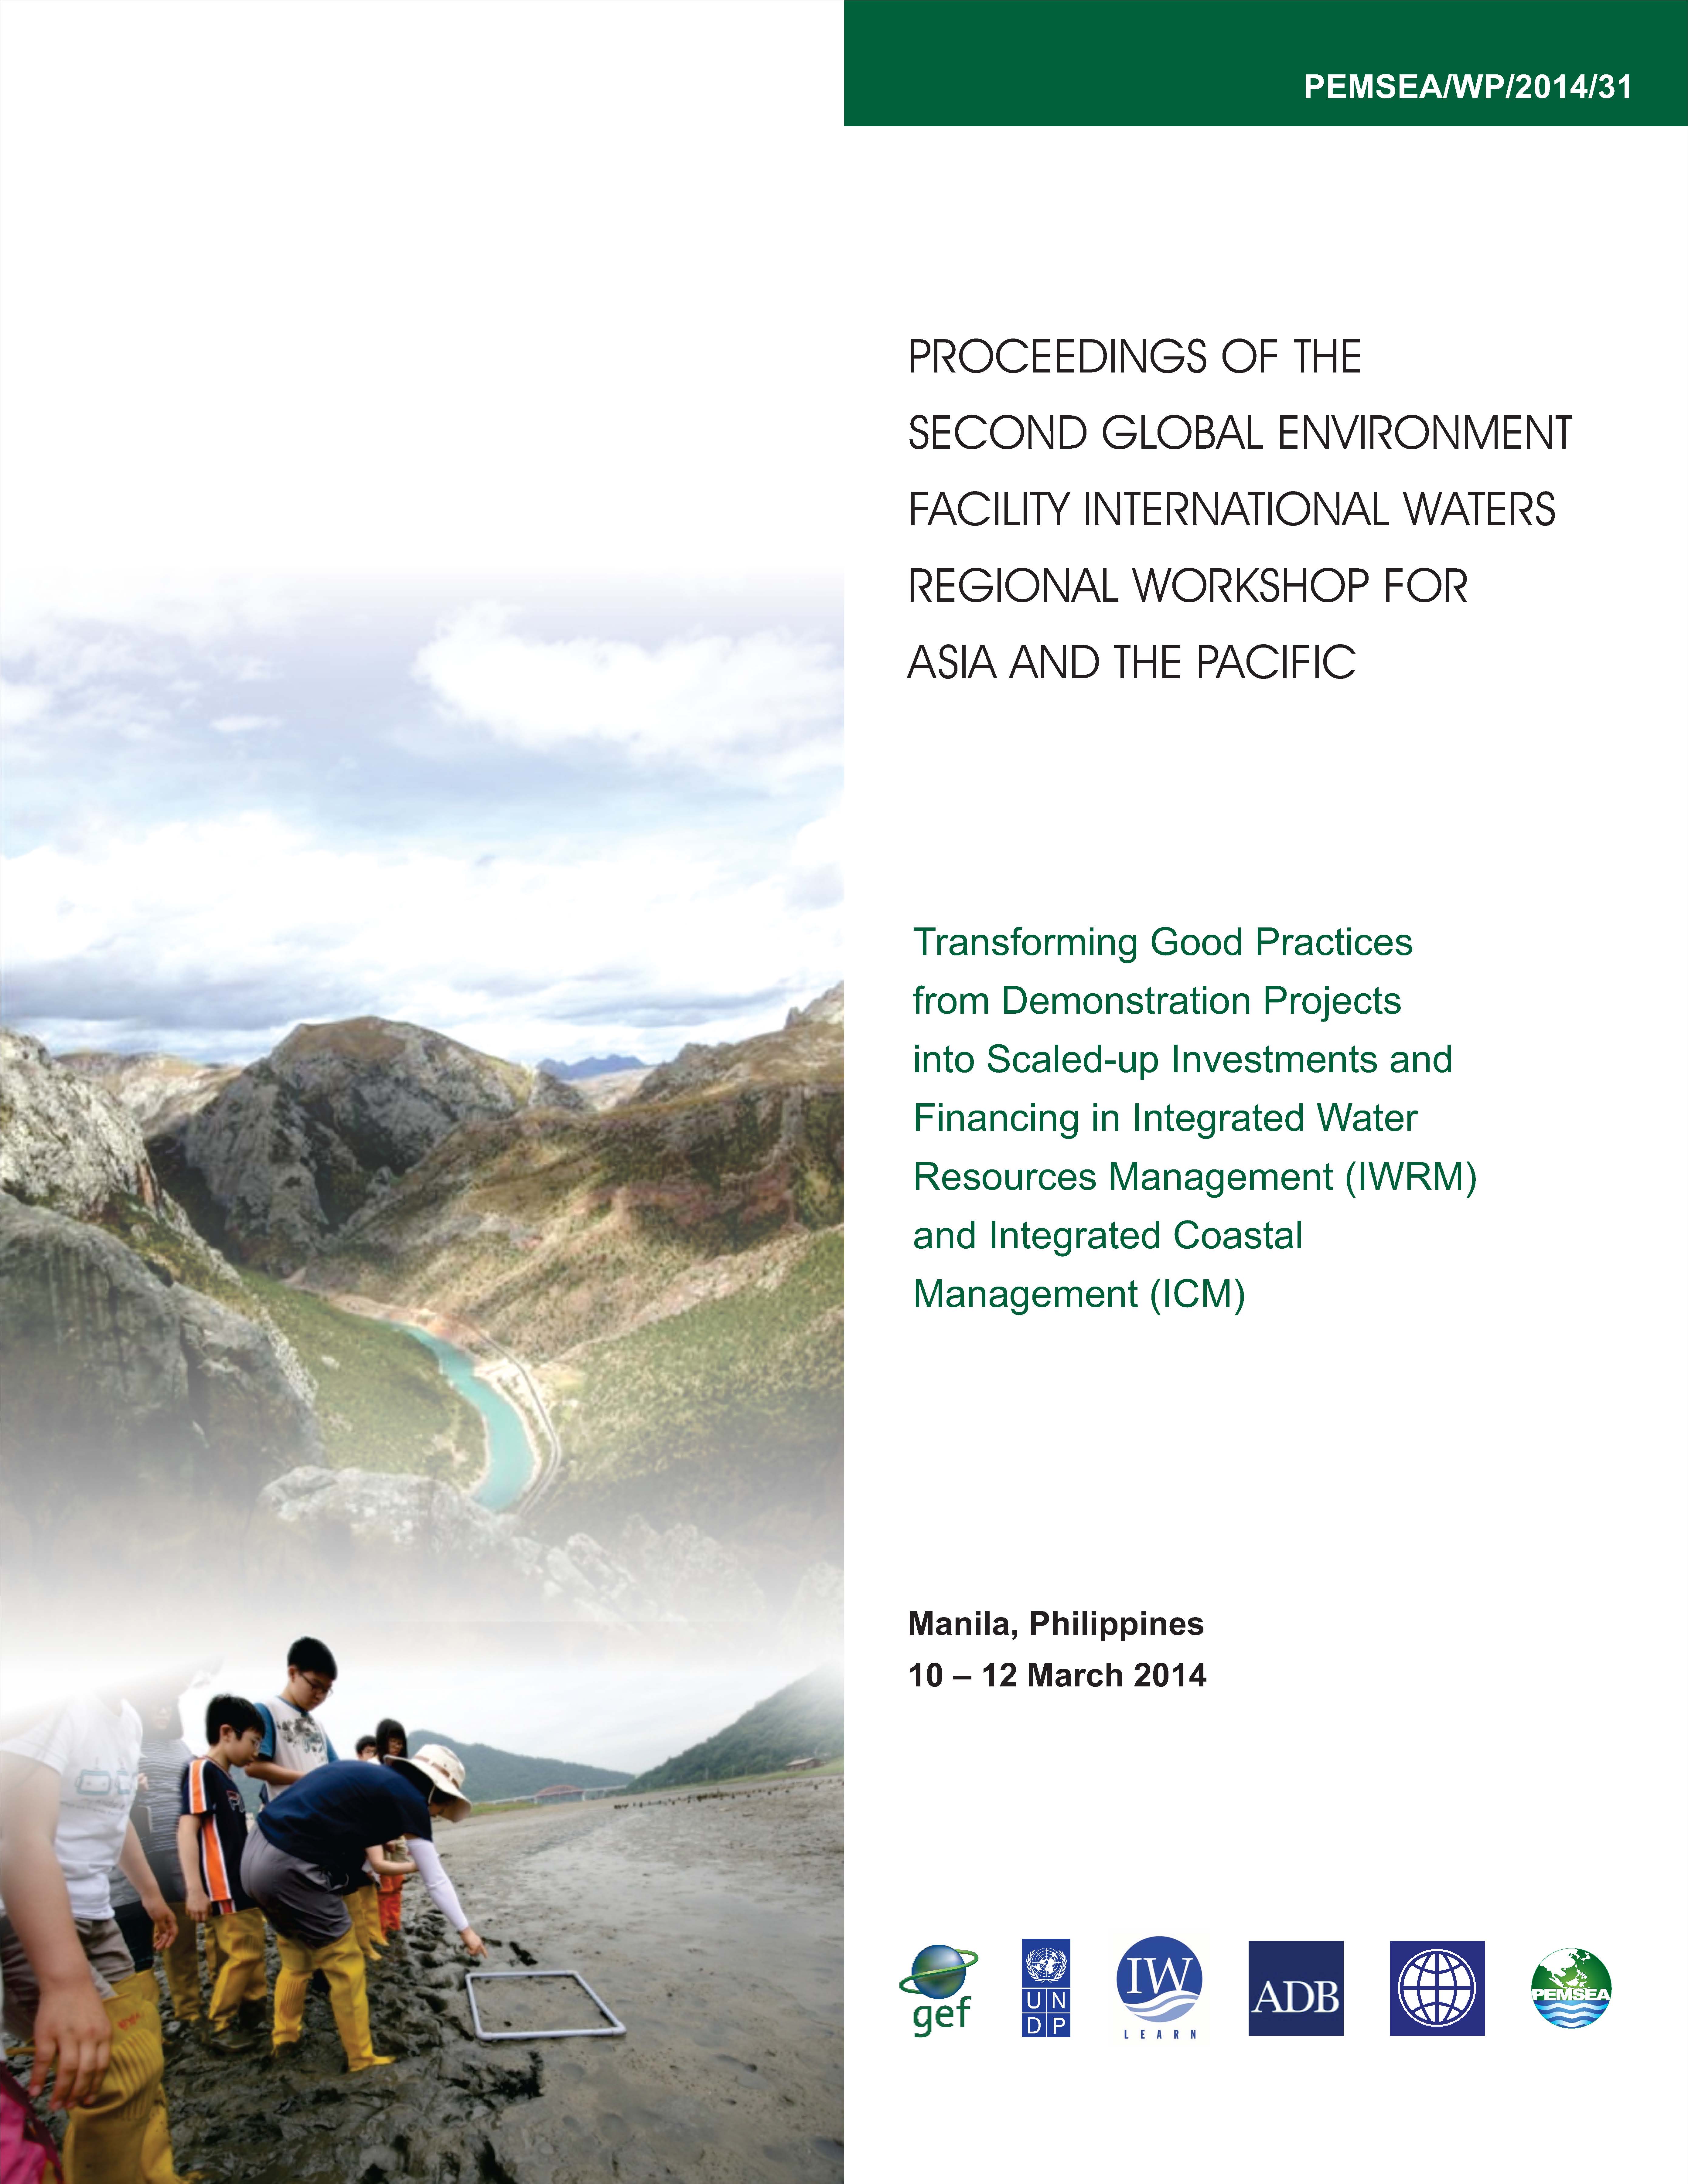 Proceedings of the 2nd Global Environment Facility (GEF) International Waters (IW) Regional Workshop for Asia and the Pacific